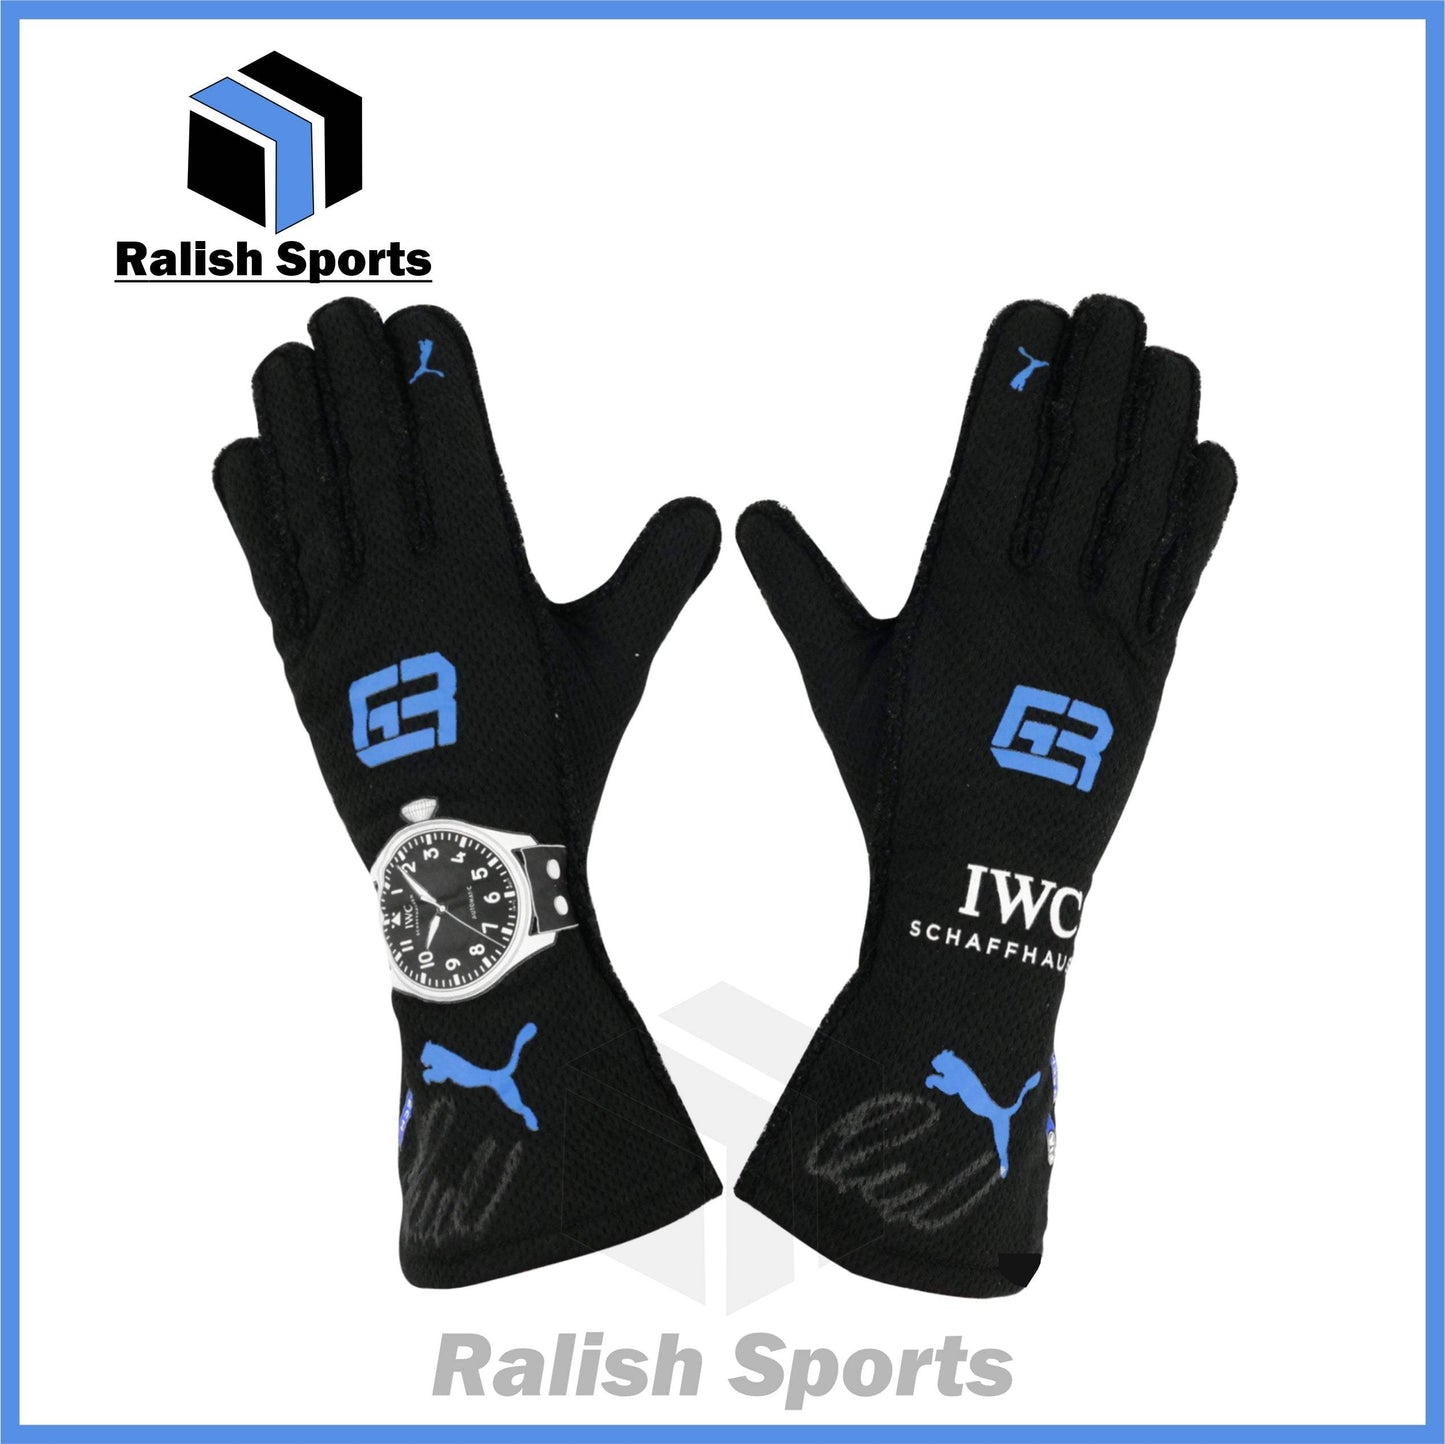 George Russell 2022 Gloves - Ralish Sports